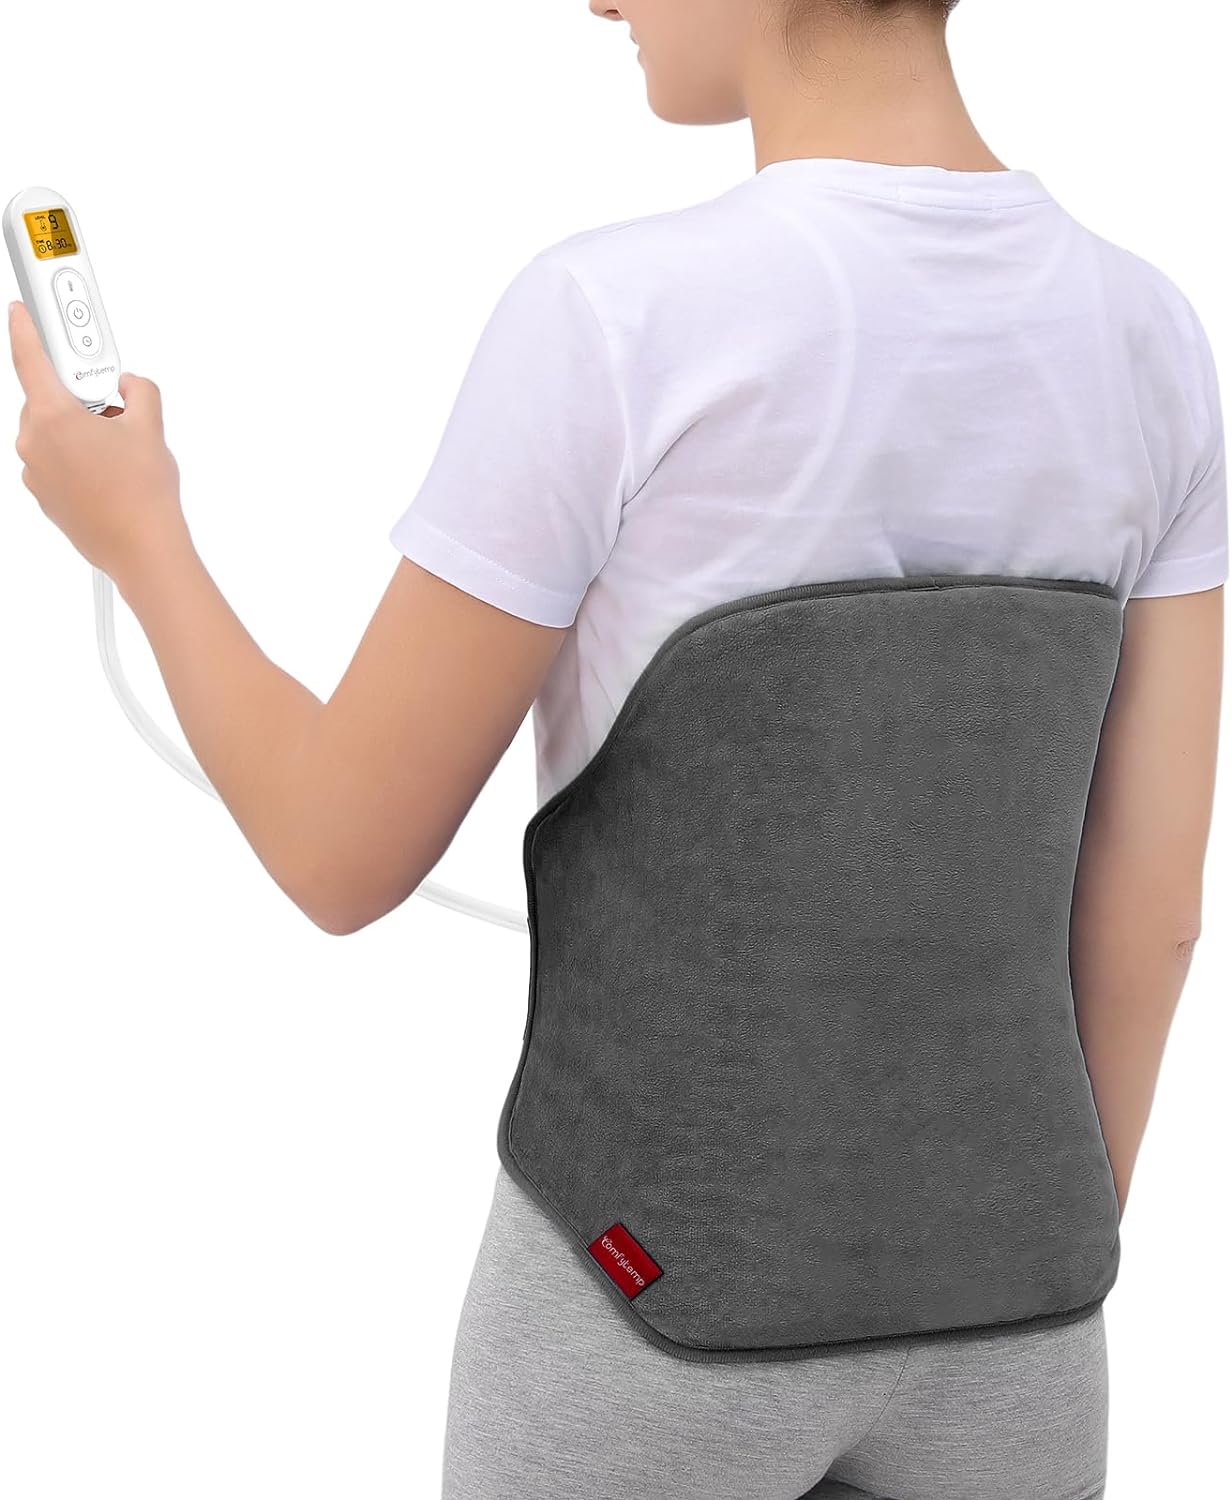  Heated Shoulder Brace, Shoulder Heating Pad 3 Heat Settings  with Hot Cold Therapy, Shoulder Wrap for Shoulder Support, Shoulder Pain  Relief, Rotator Cuff, Shoulder Compression Sleeve for Men Women : Health